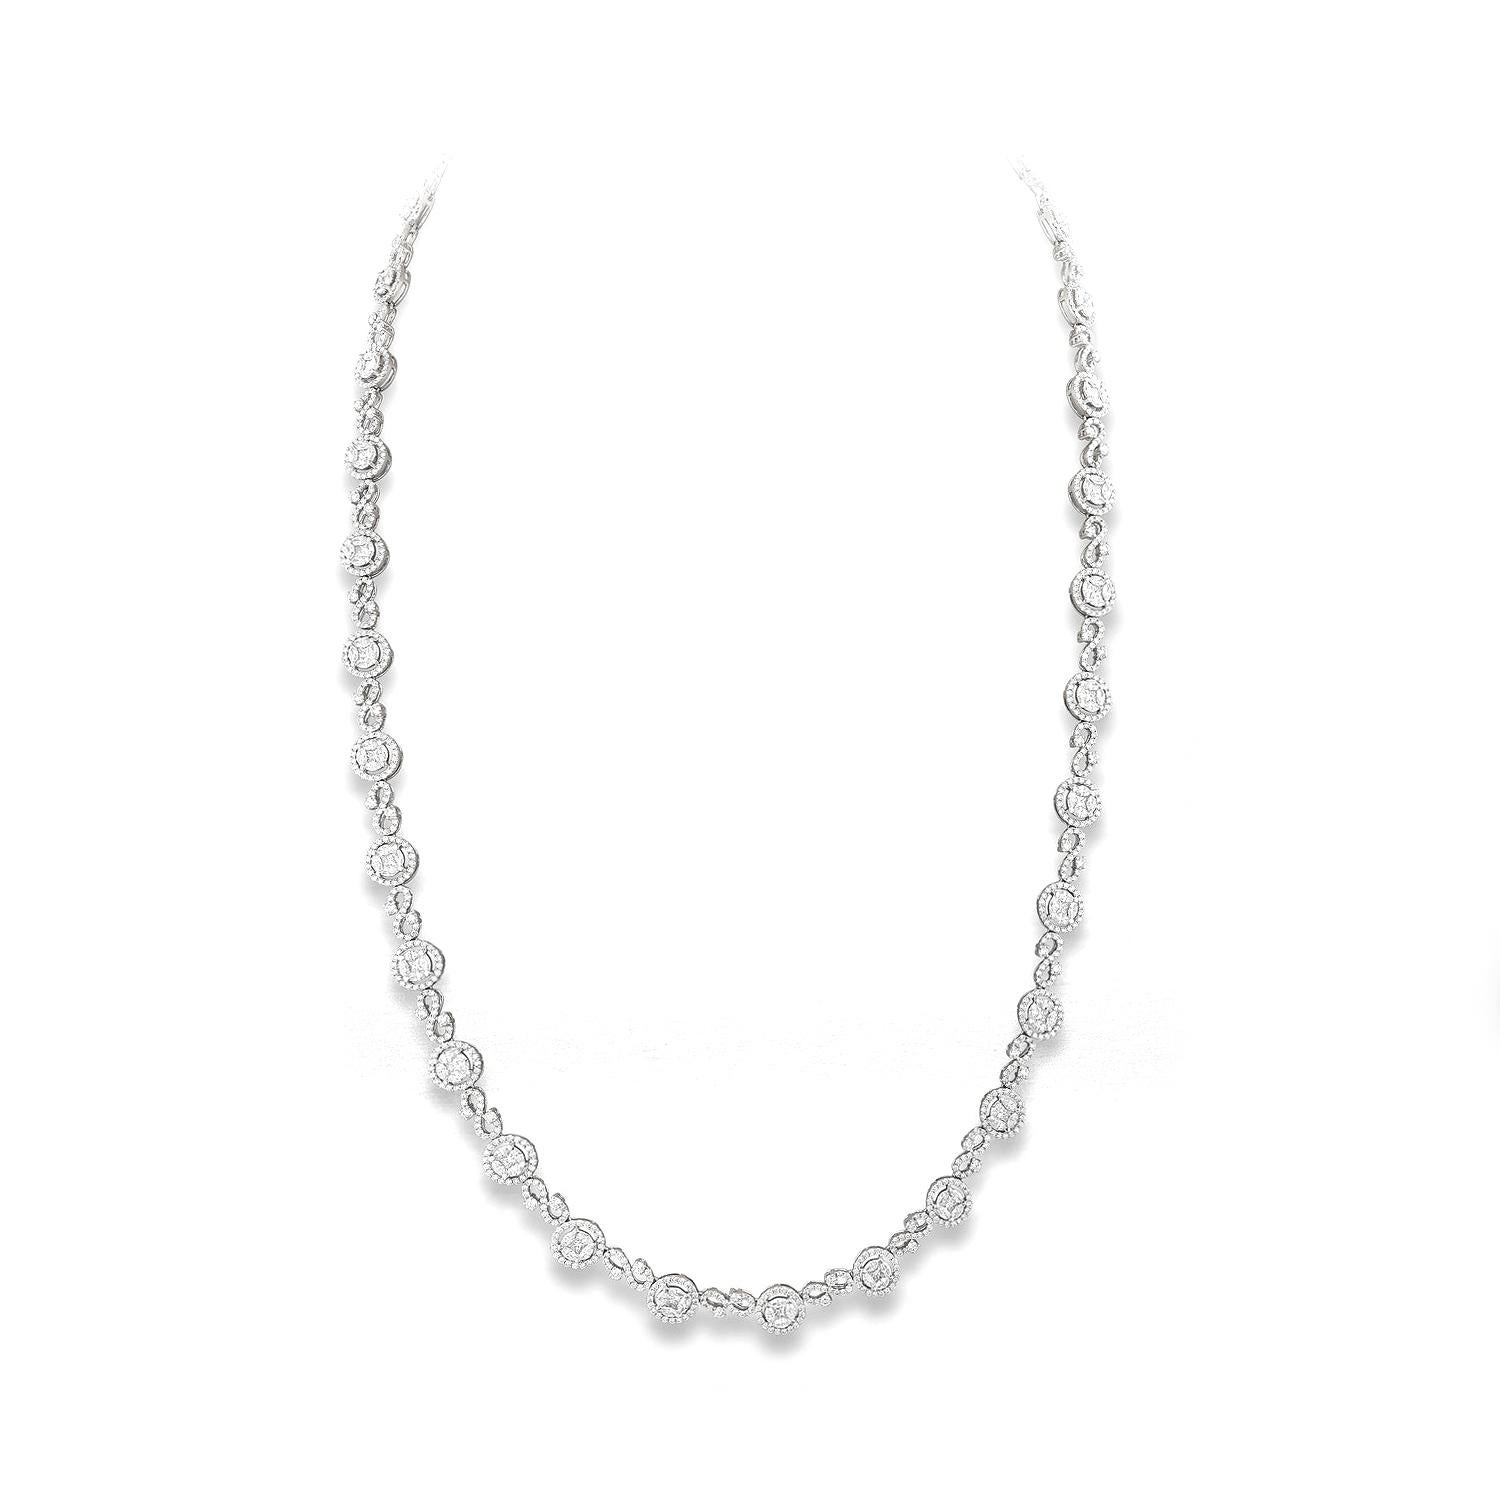 Necklace in 18kt white gold set with 195 princess and marquise cut  diamonds 14.03 cts and 1414 diamonds 14.03 cts          